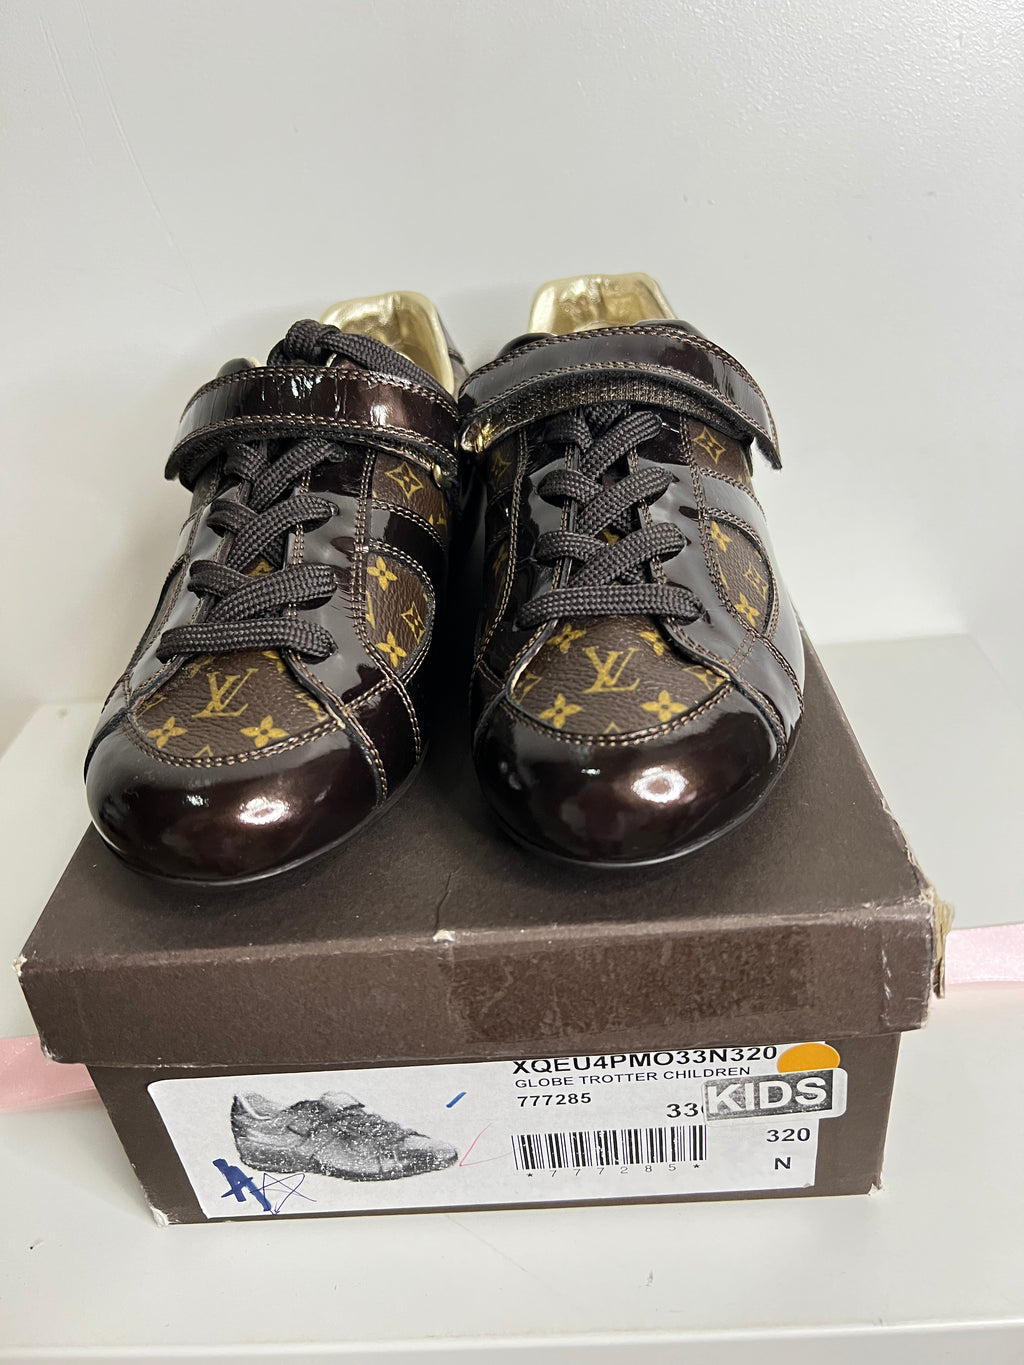 Preloved Louis Vuitton Shoes For Kids Unisex